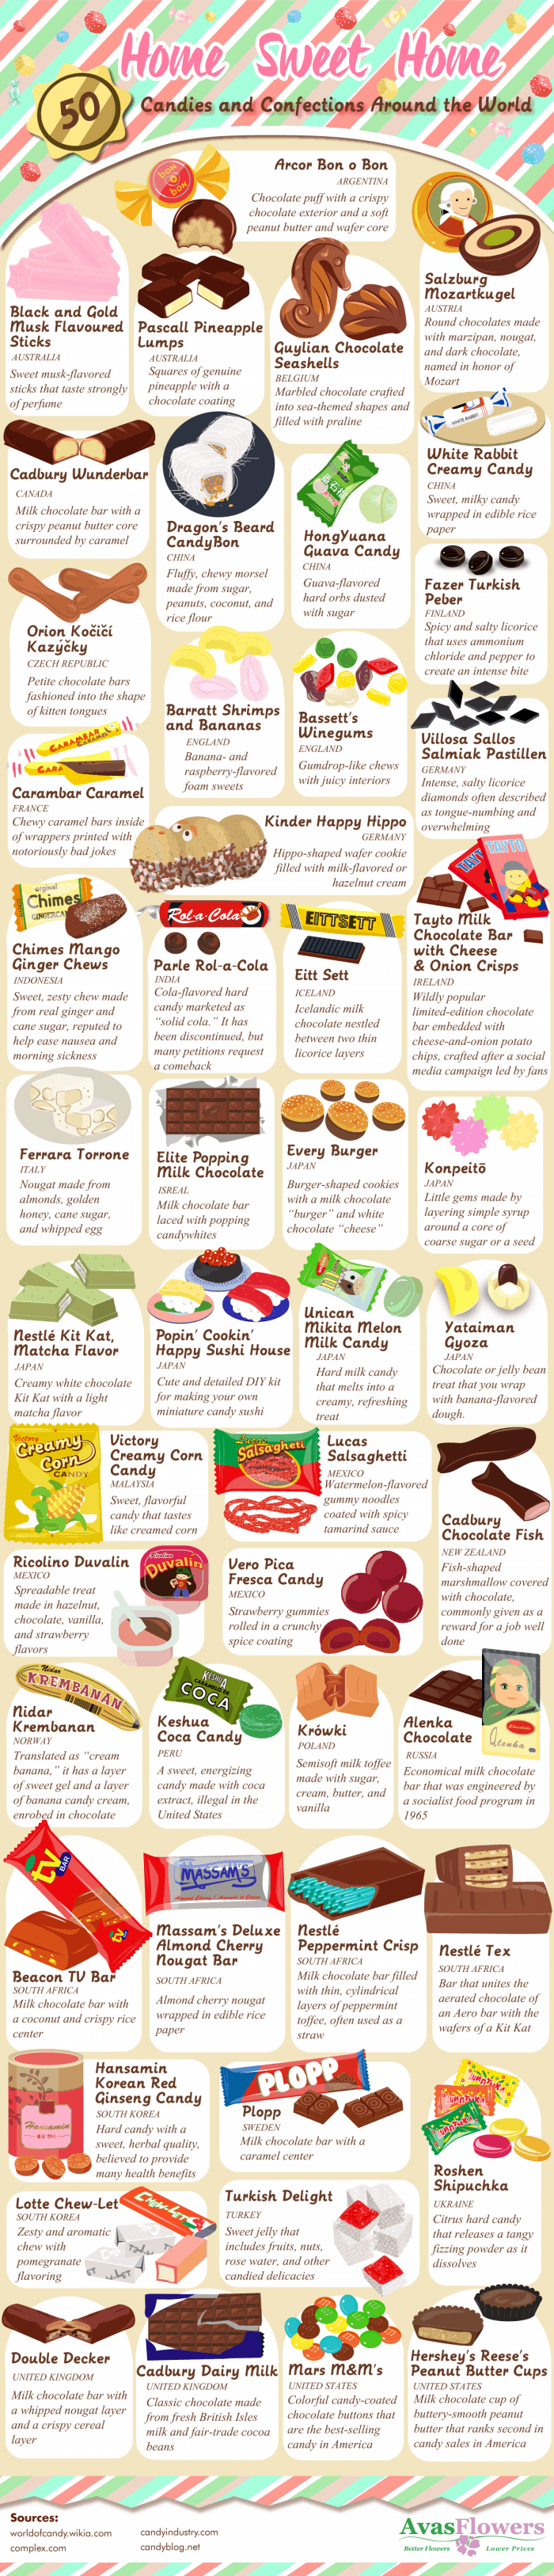 Different kinds of candy from places in the world